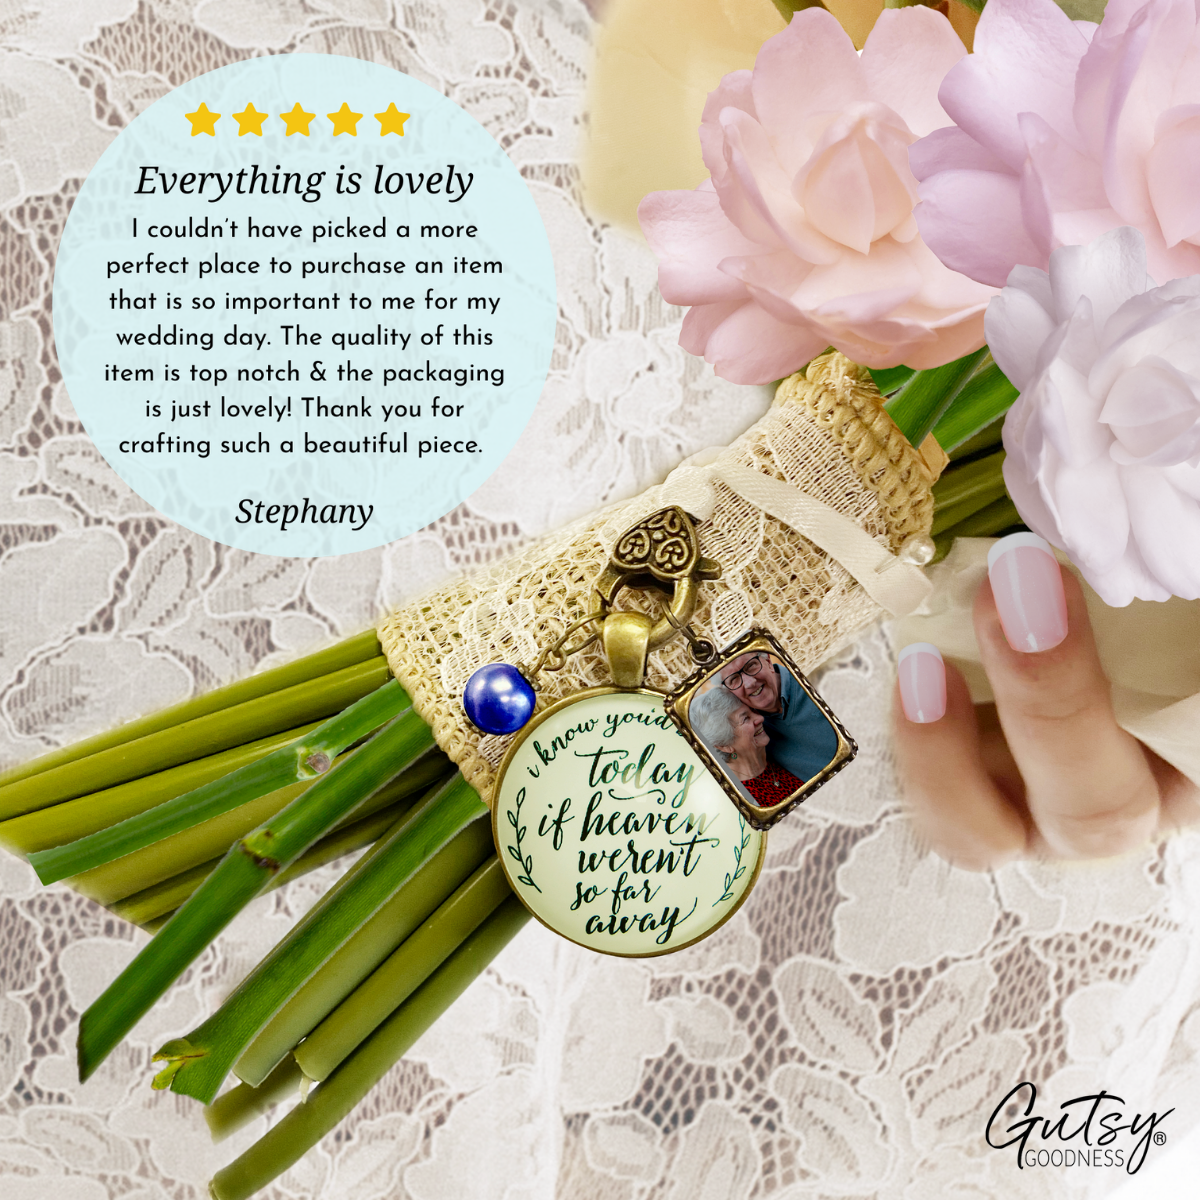 Wedding Bouquet Memorial Charm I Know You'd Be Here Heaven Rustic Memory Photo - Gutsy Goodness Handmade Jewelry Gifts